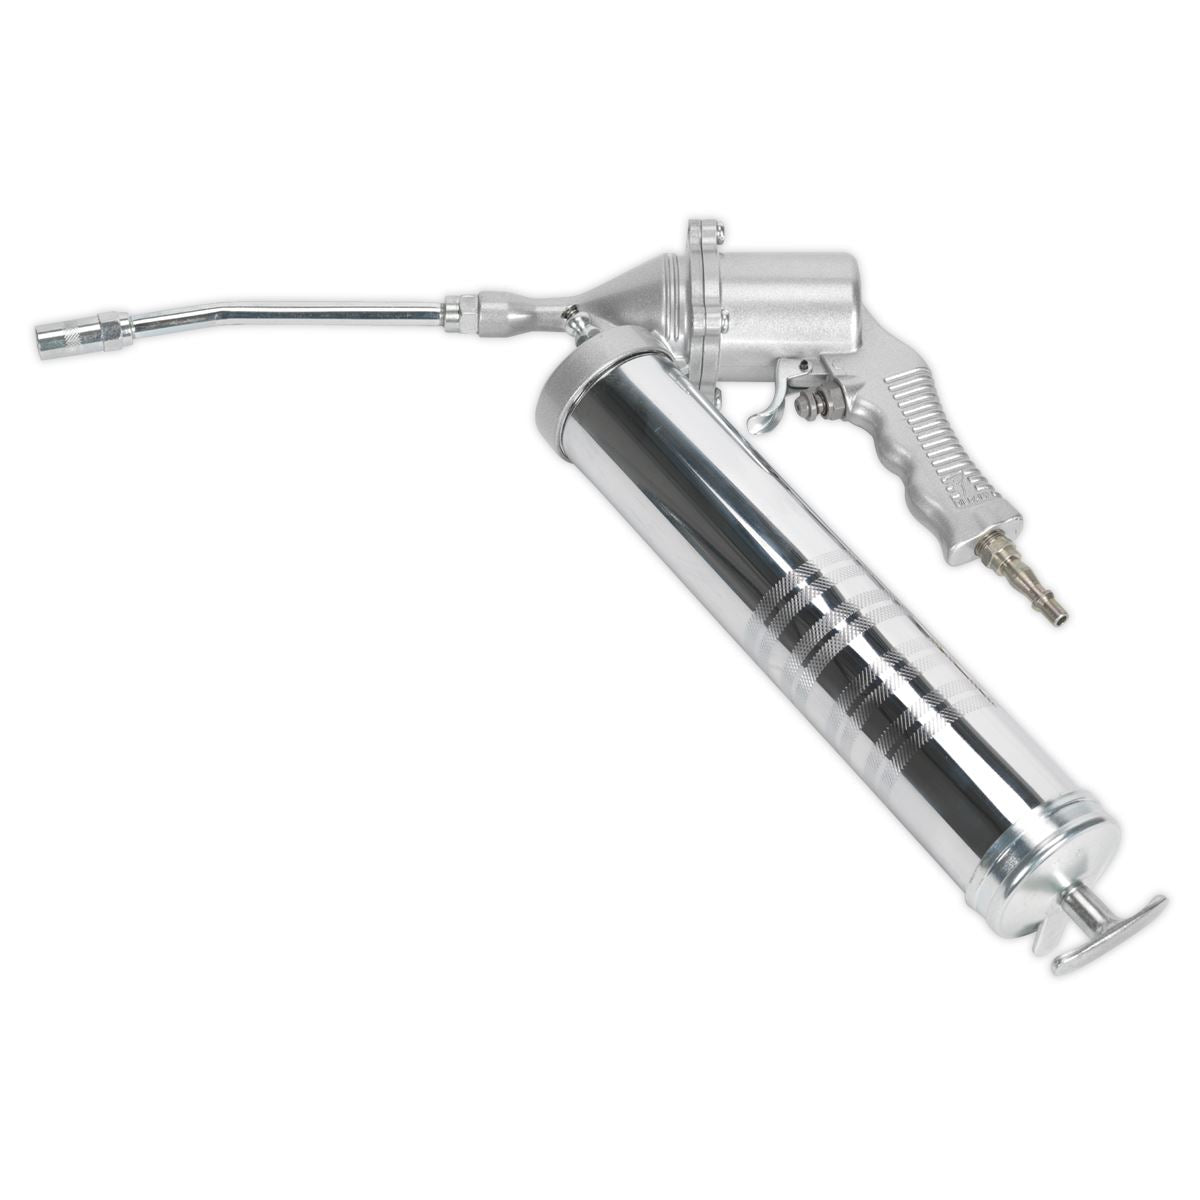 Sealey Air Operated Continuous Flow Grease Gun - Pistol Type